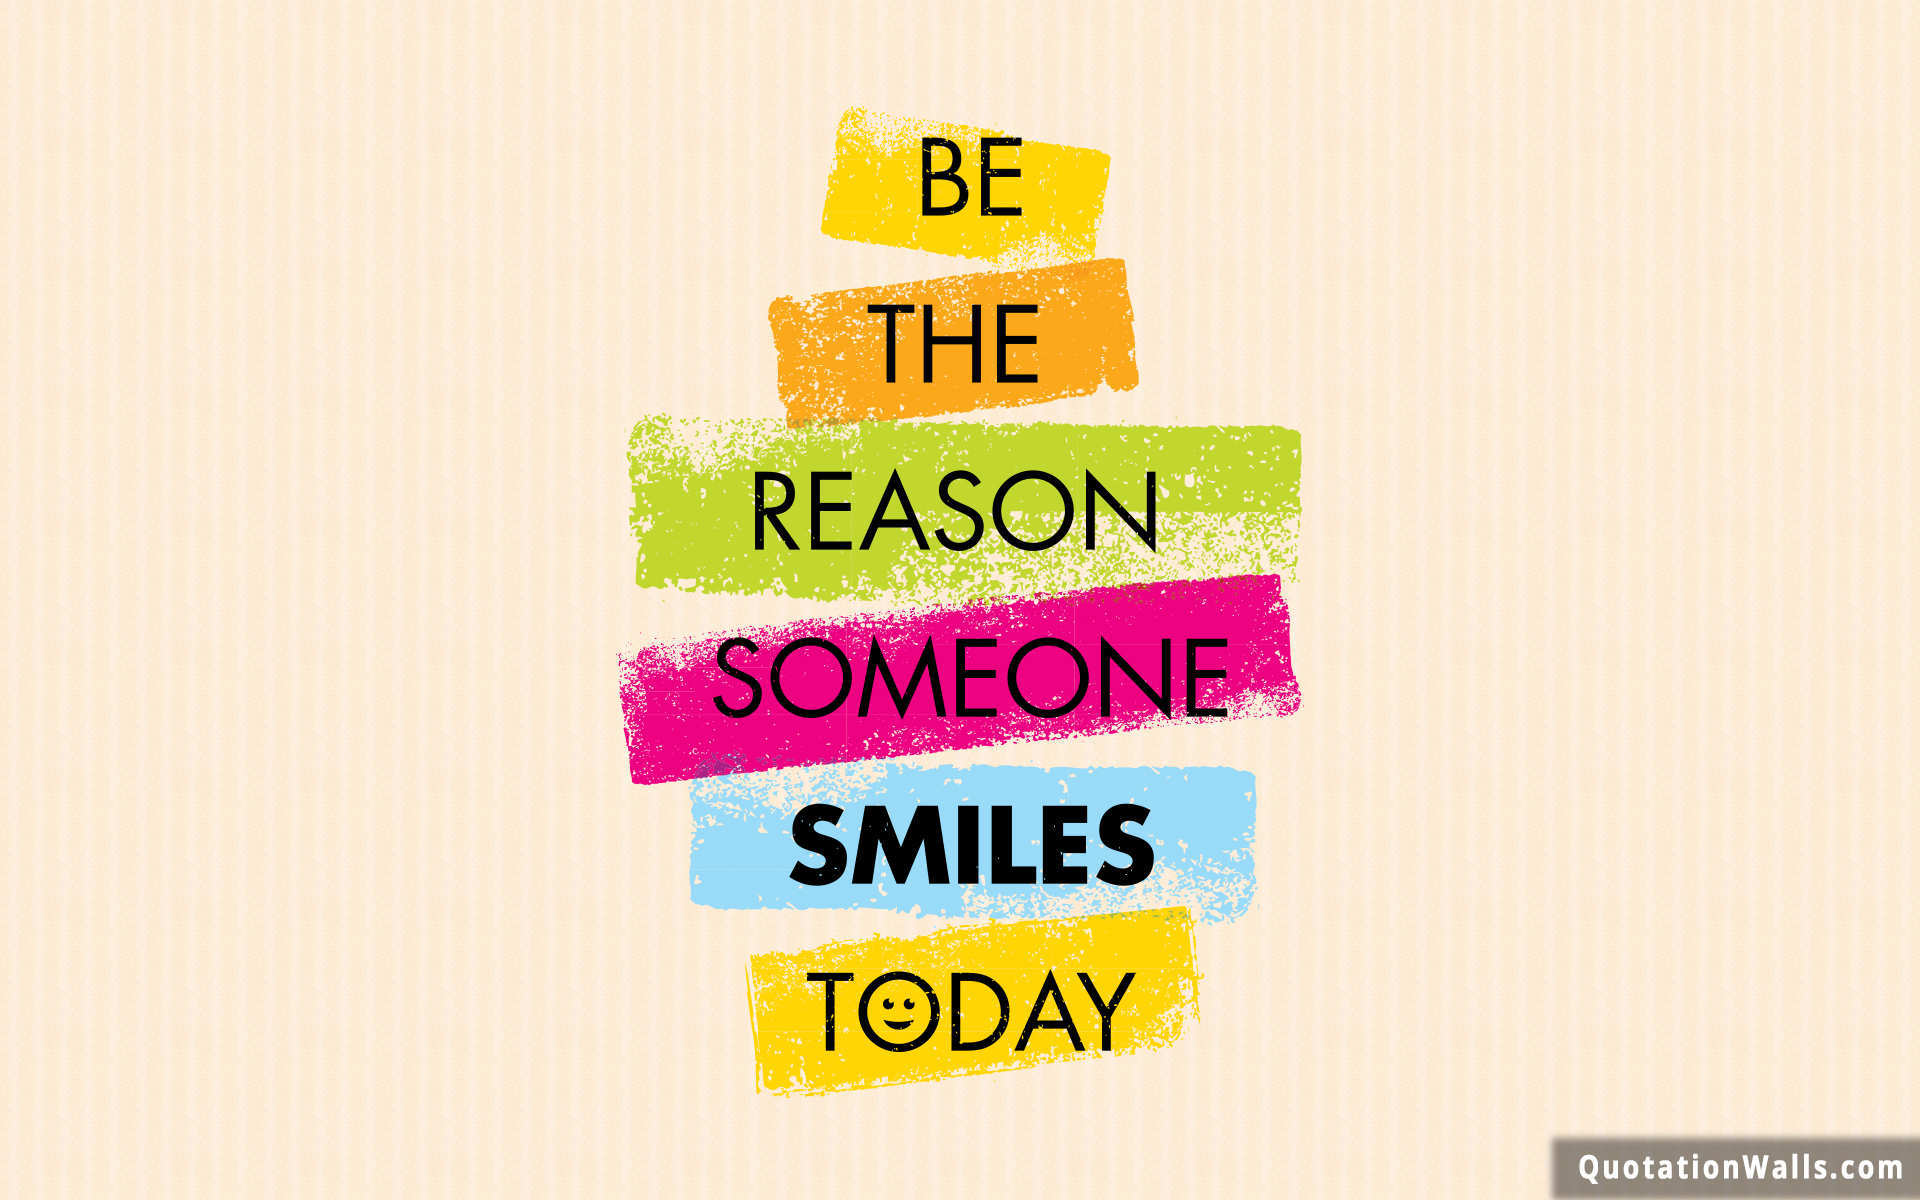 Be The Reason Wallpaper For Mobile Quotes Wallpaper For Mobile Wallpaper & Background Download